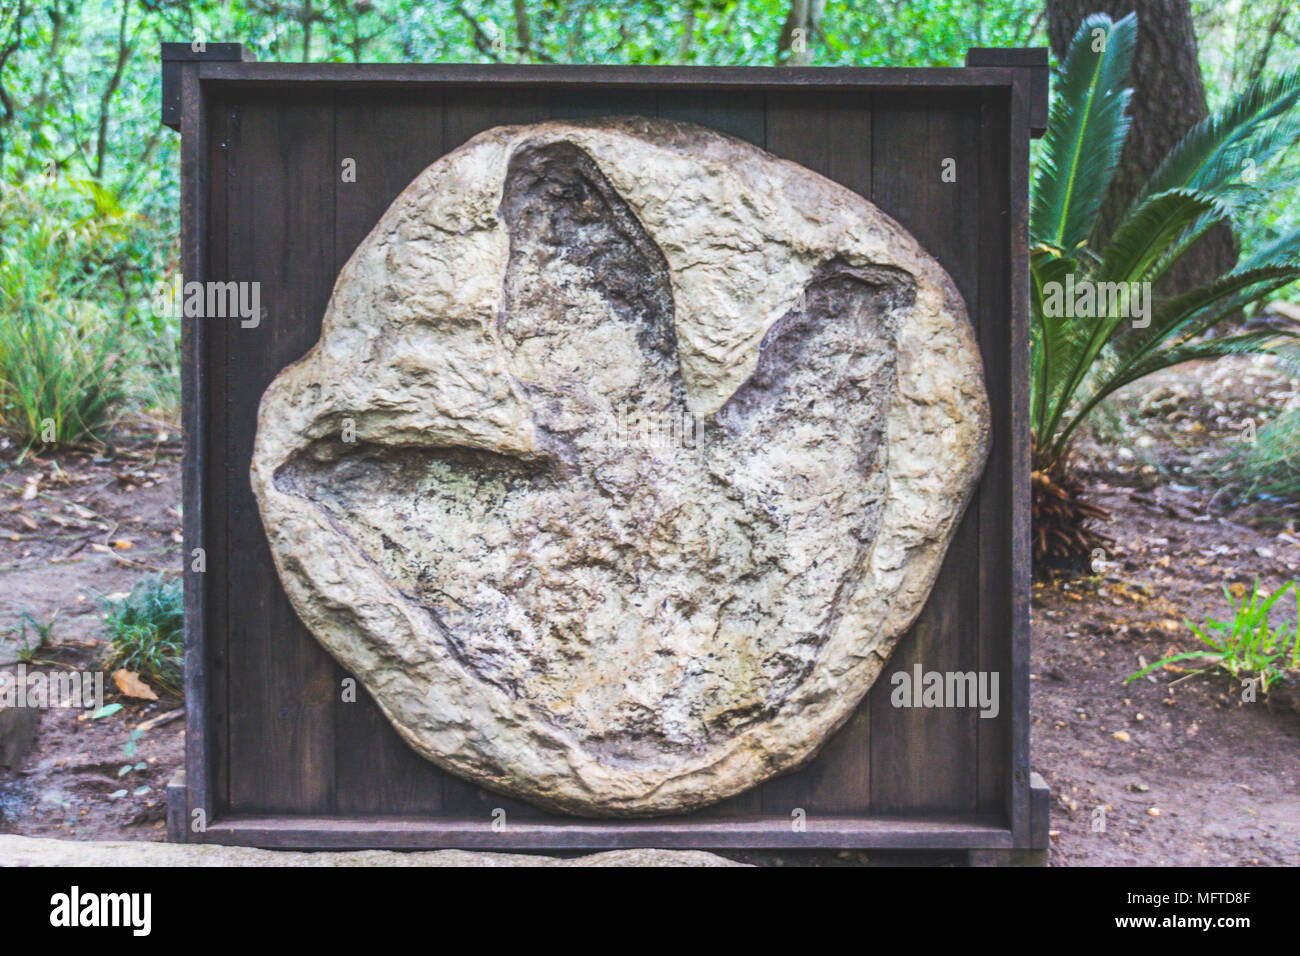 photograph of a fossilized dinosaur footprint displayed in a wooded area Stock Photo